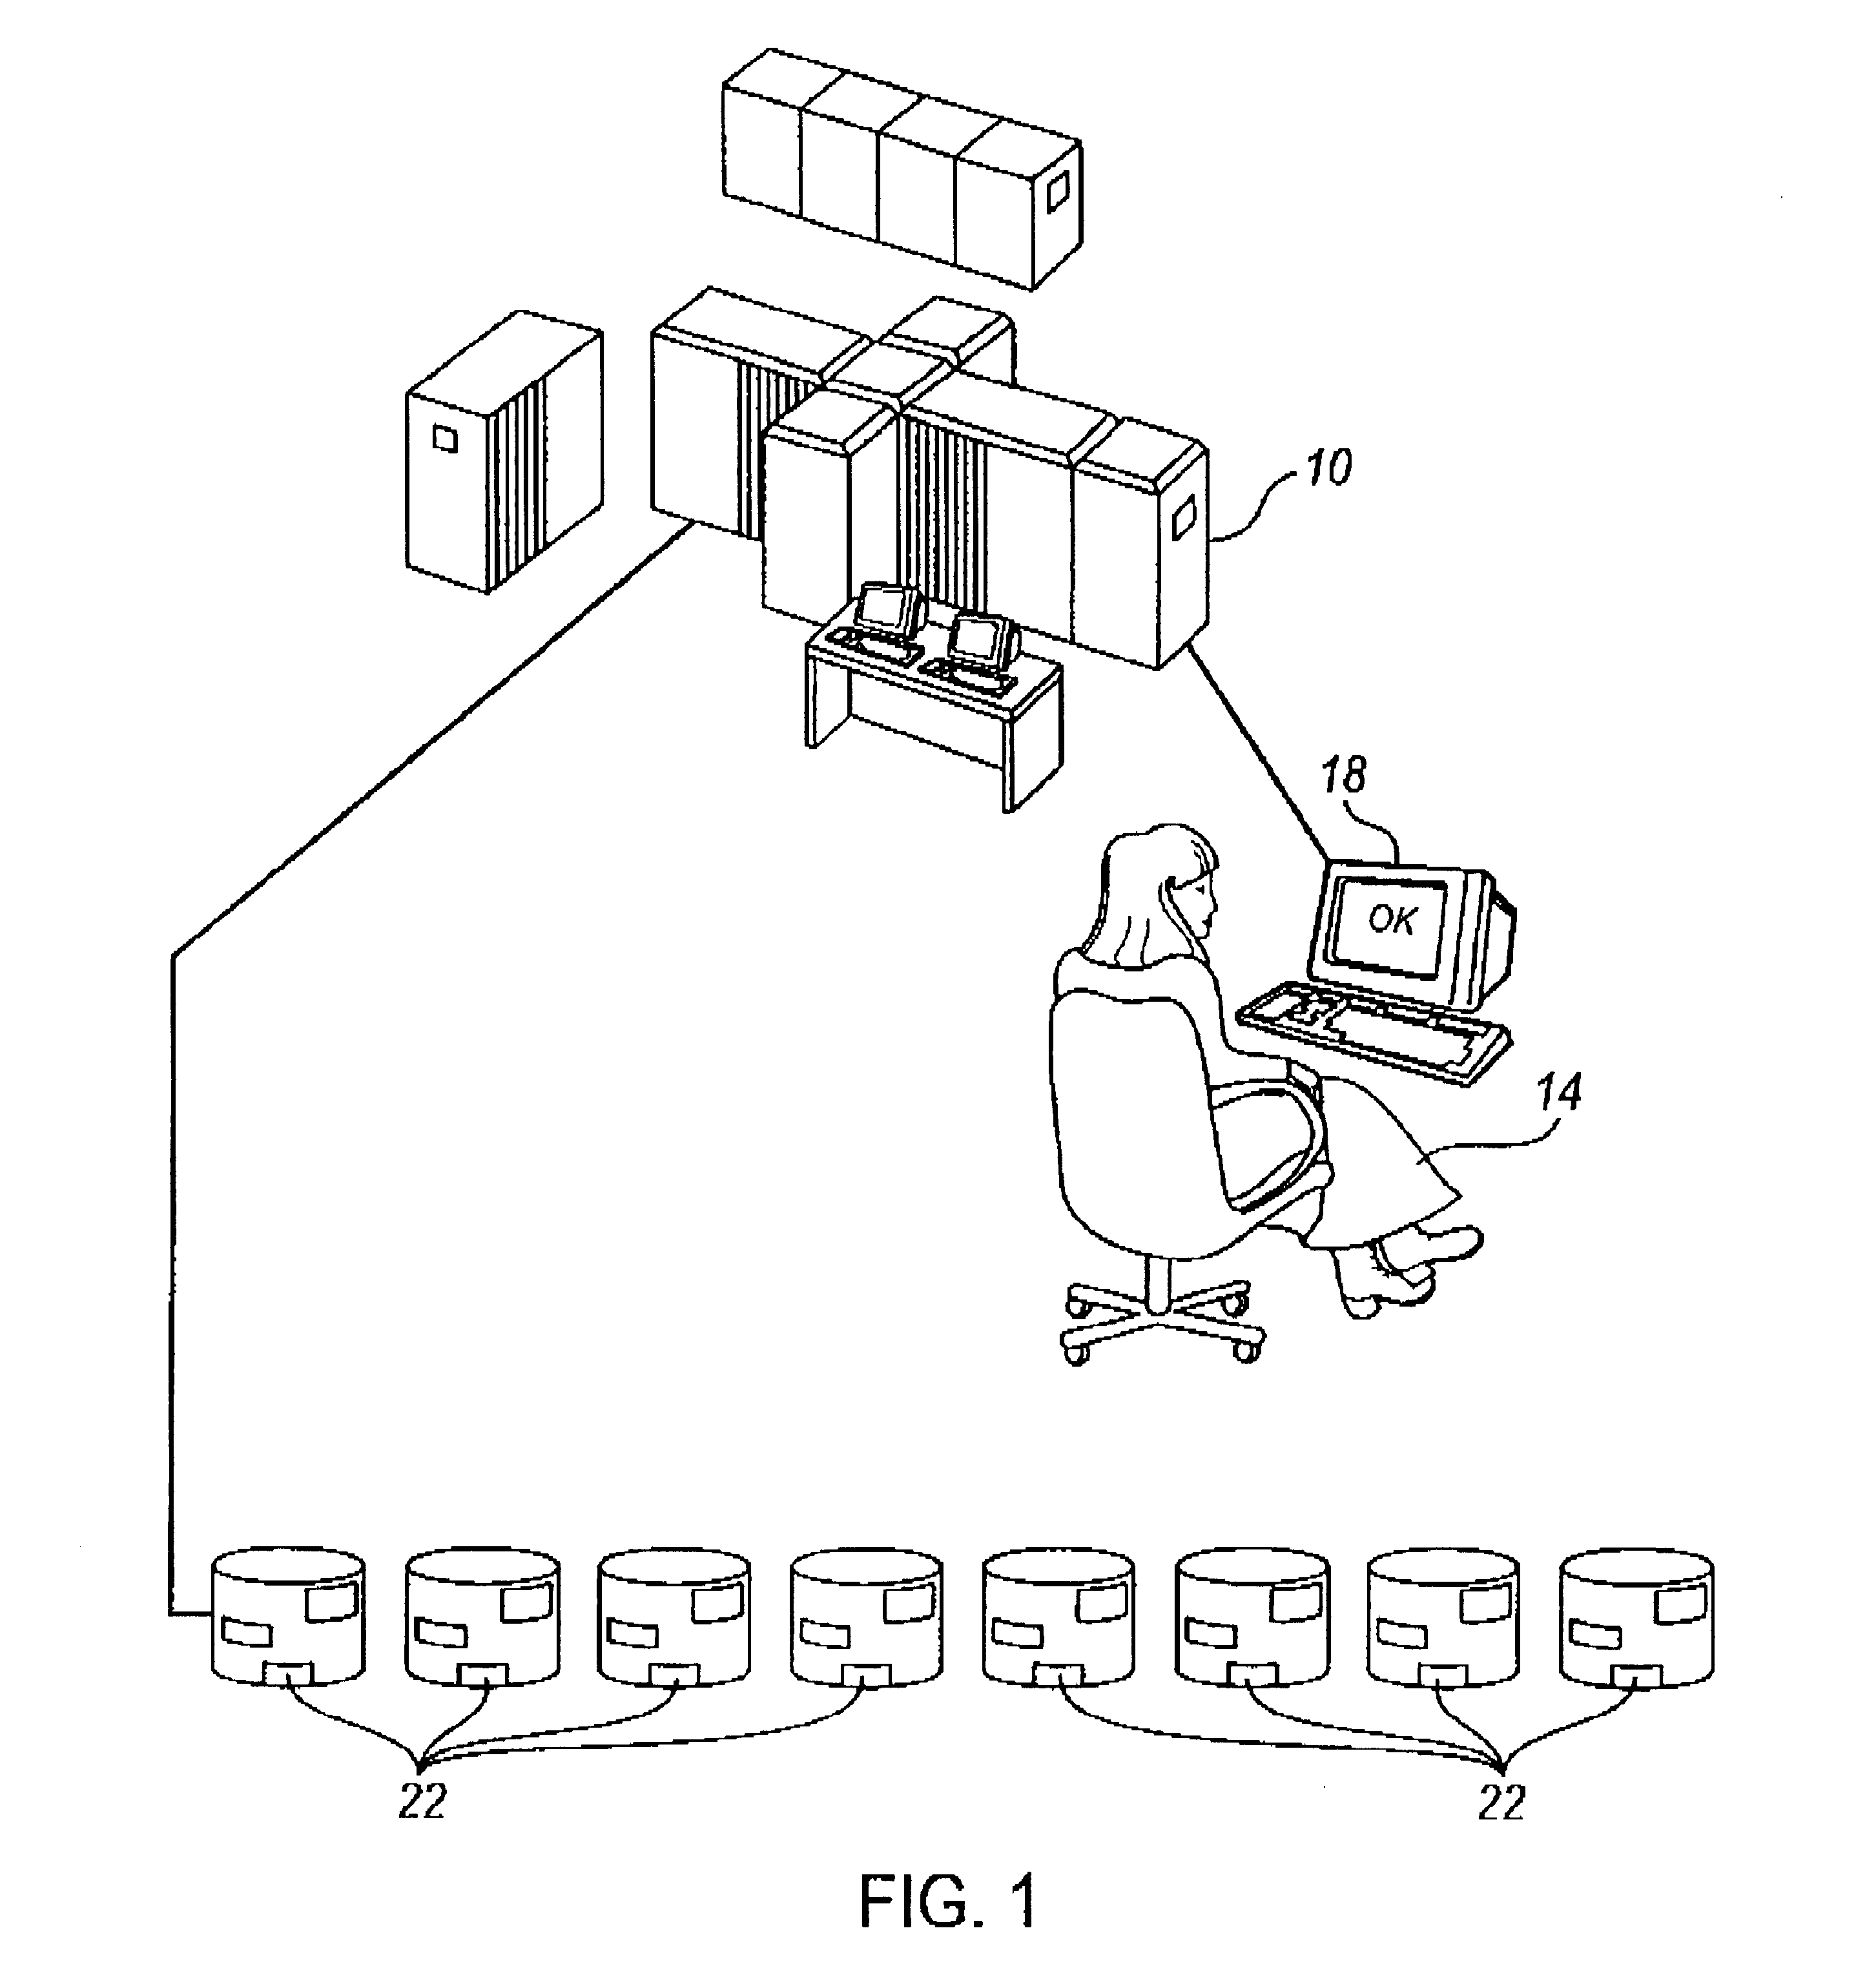 Method and apparatus for reducing space allocation failures in storage management systems